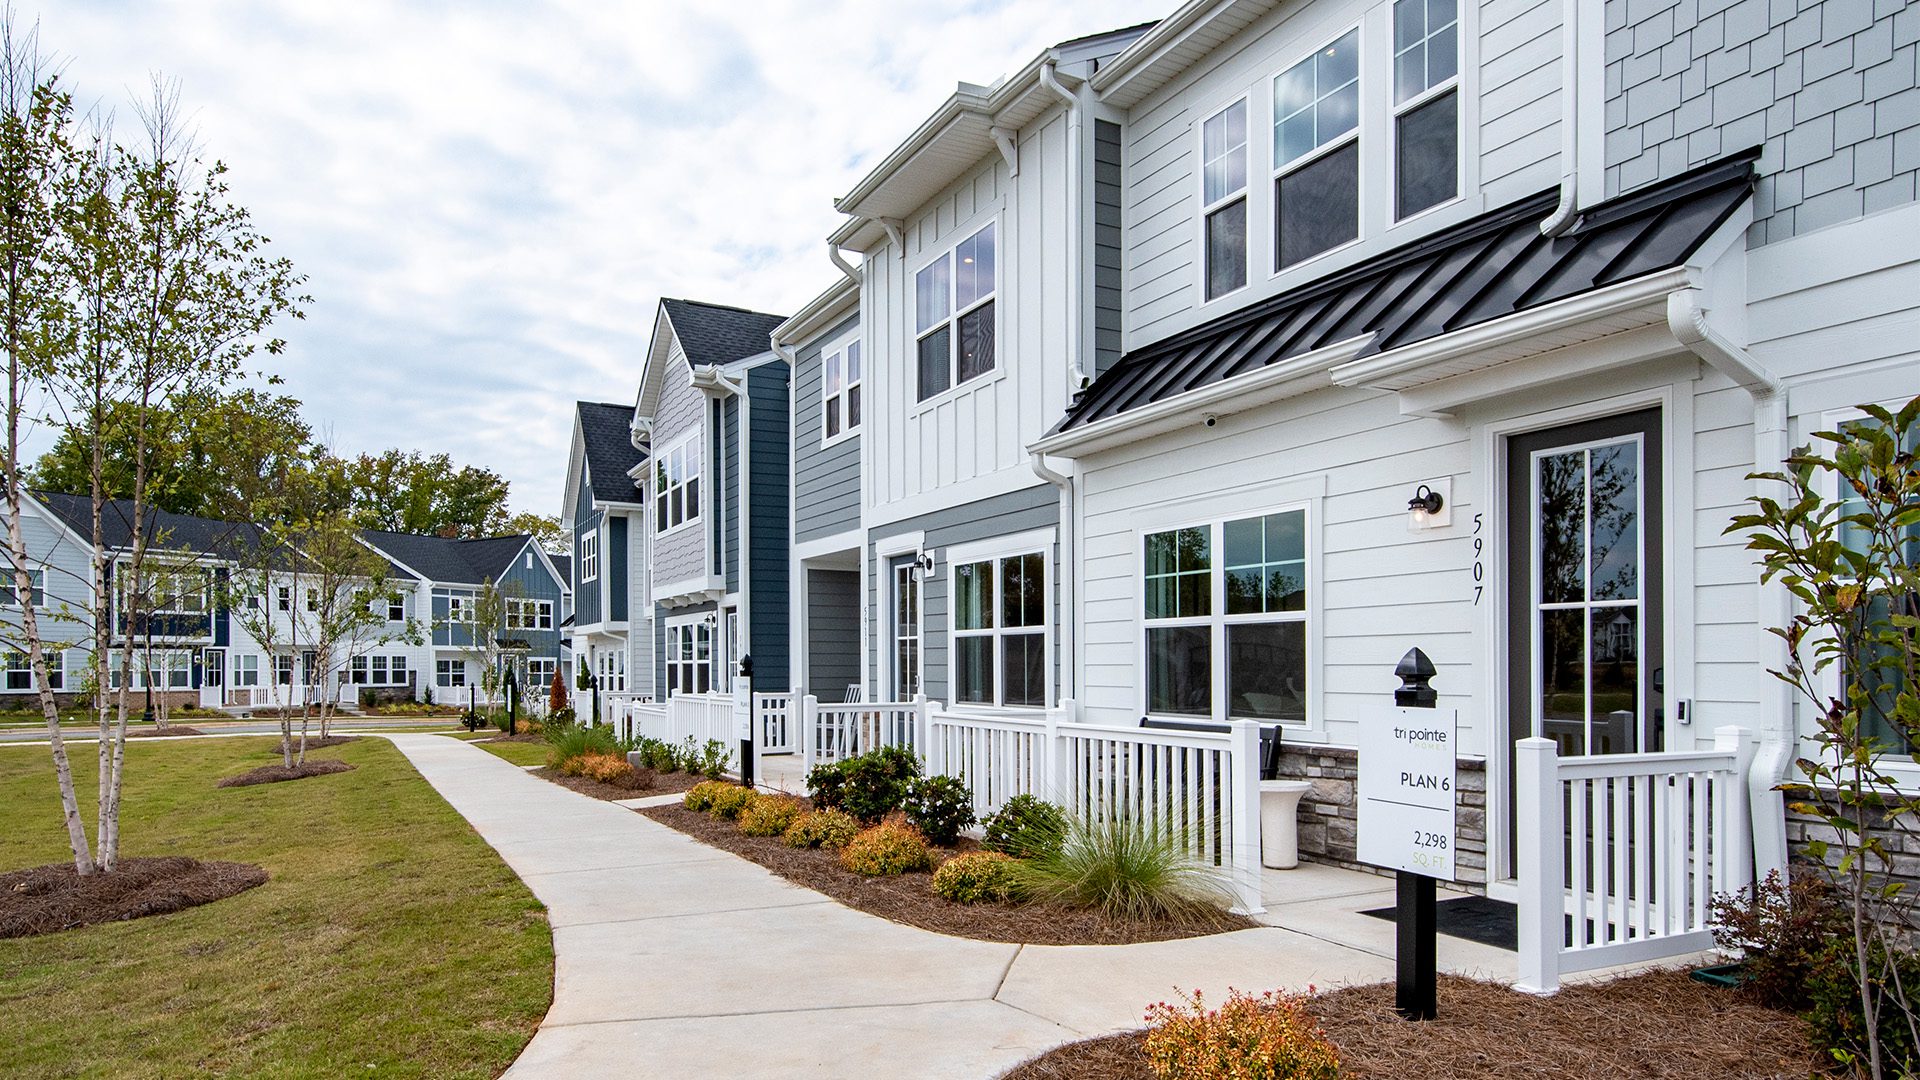 Tri Pointe Homes townhomes with blue and white exterior finishes